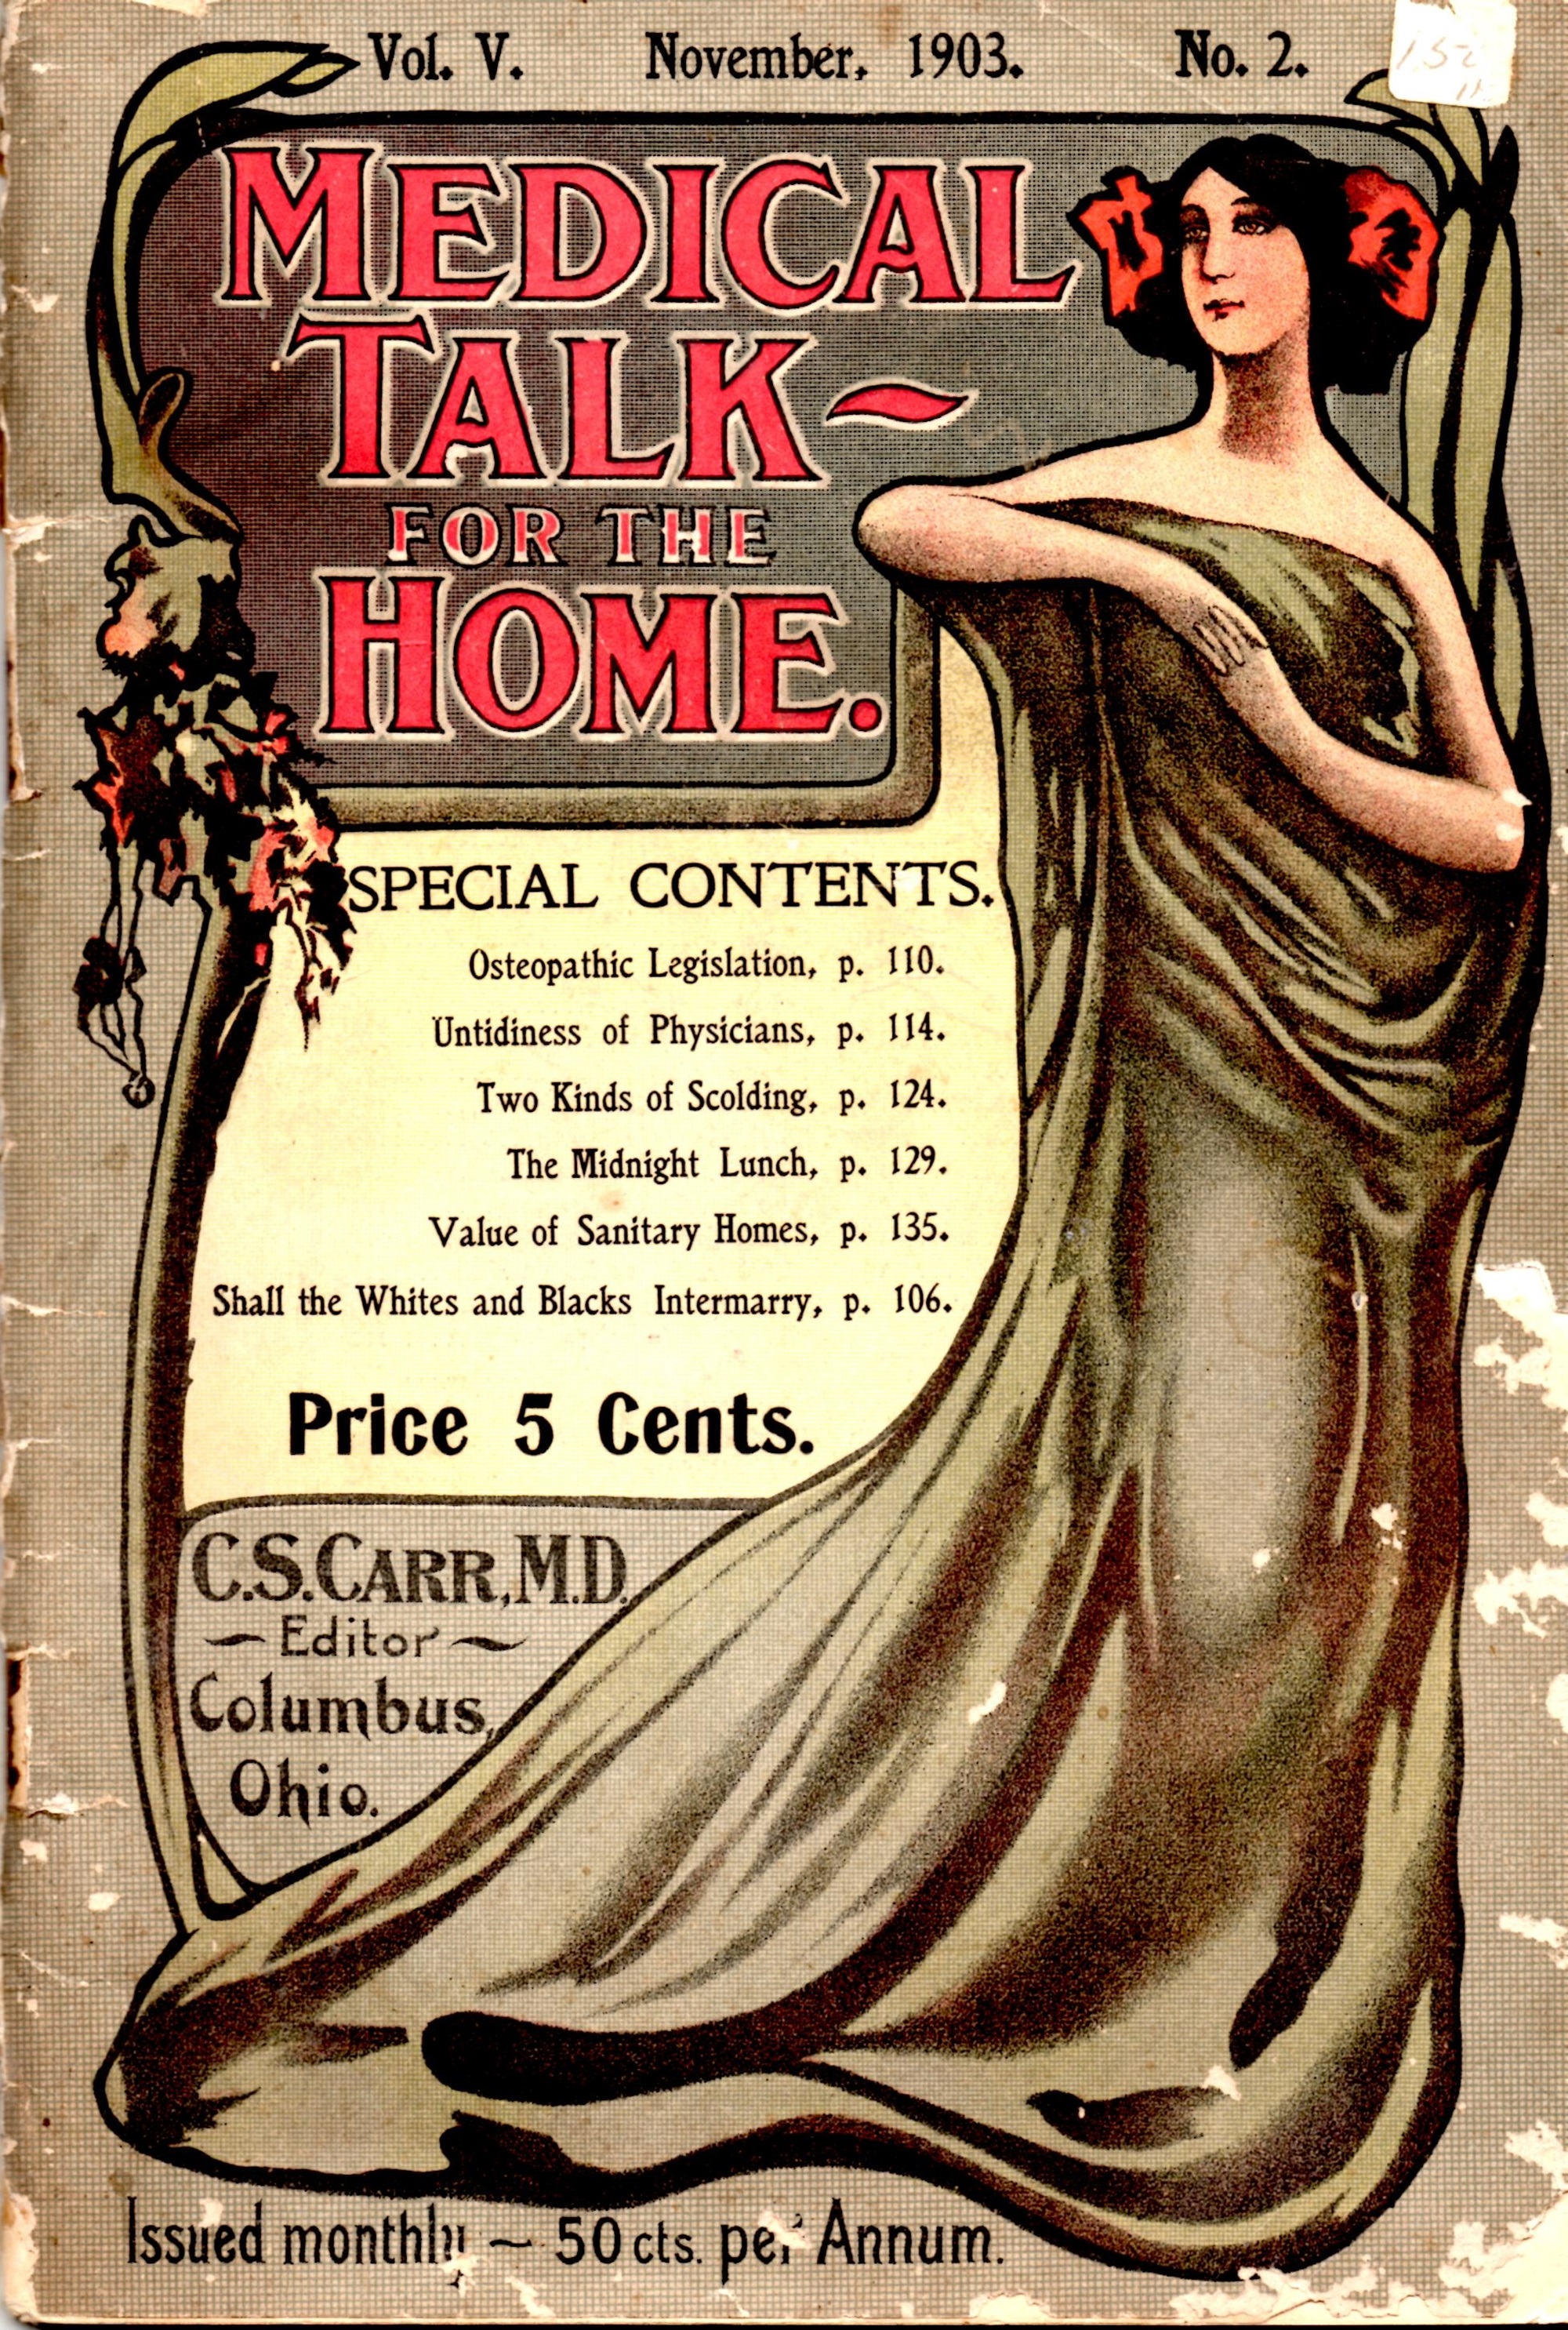 the　No.　for　Medical　Talk　Carr,　C.　Paperback　V.　MD　Good　(editor):　Home　Book　by　Vol.　1903　(1903)　November　S.　Booth